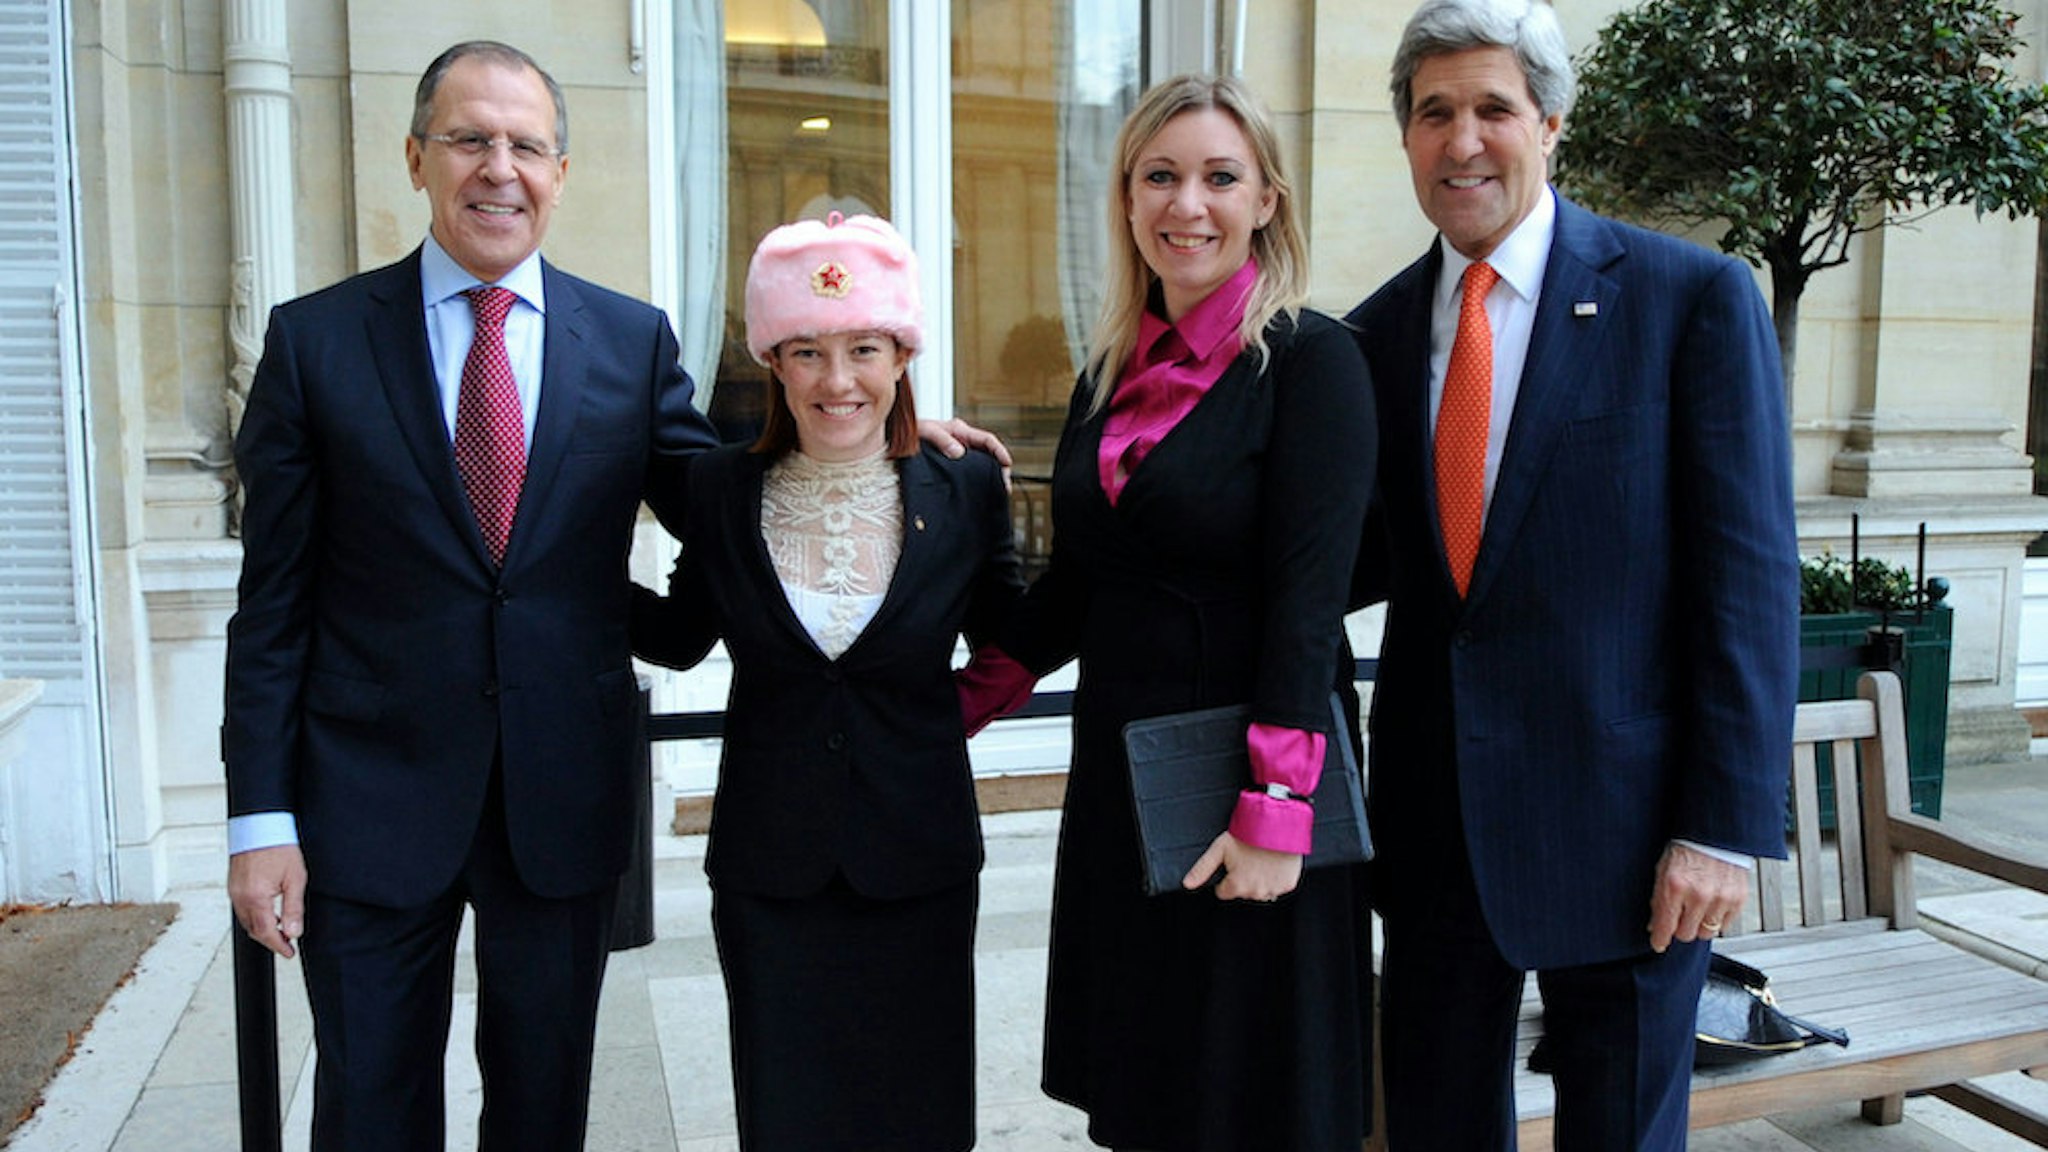 U.S. Department of State Spokesperson Jennifer Psaki -- sporting a shapka, or fur hat with ear flaps, given to her by Russian counterpart Maria Zakharova -- stands with Zakharova between U.S. Secretary of State John Kerry and Russian Foreign Minister Sergey Lavrov in Paris, France, on January 13, 2014. (State Department photo/Public Domain)